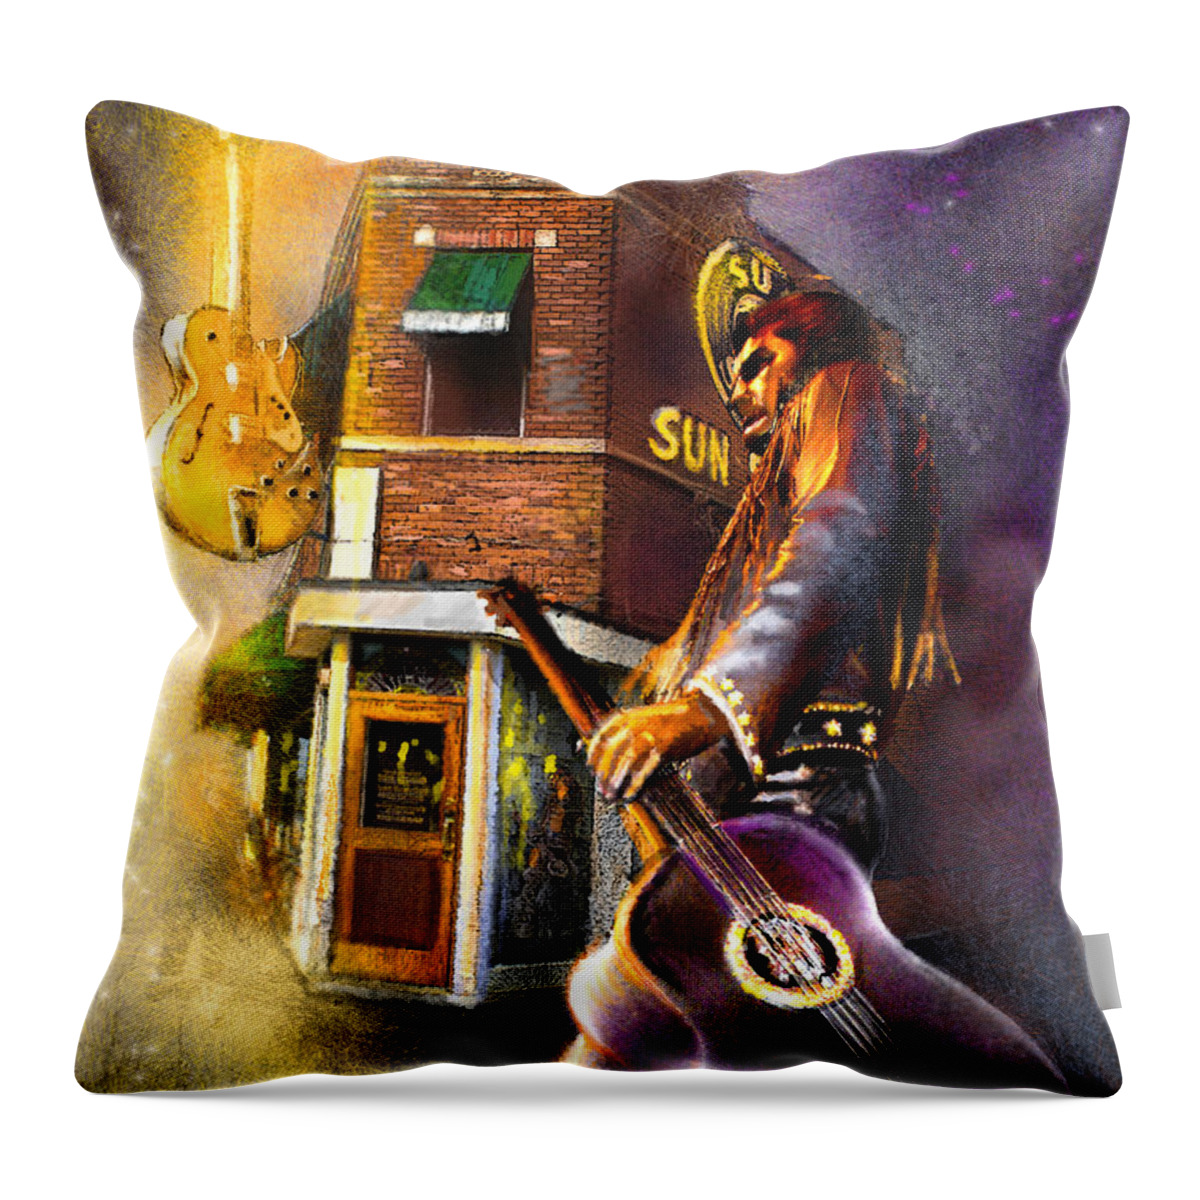 Memphis Throw Pillow featuring the painting Memphis Nights 06 by Miki De Goodaboom